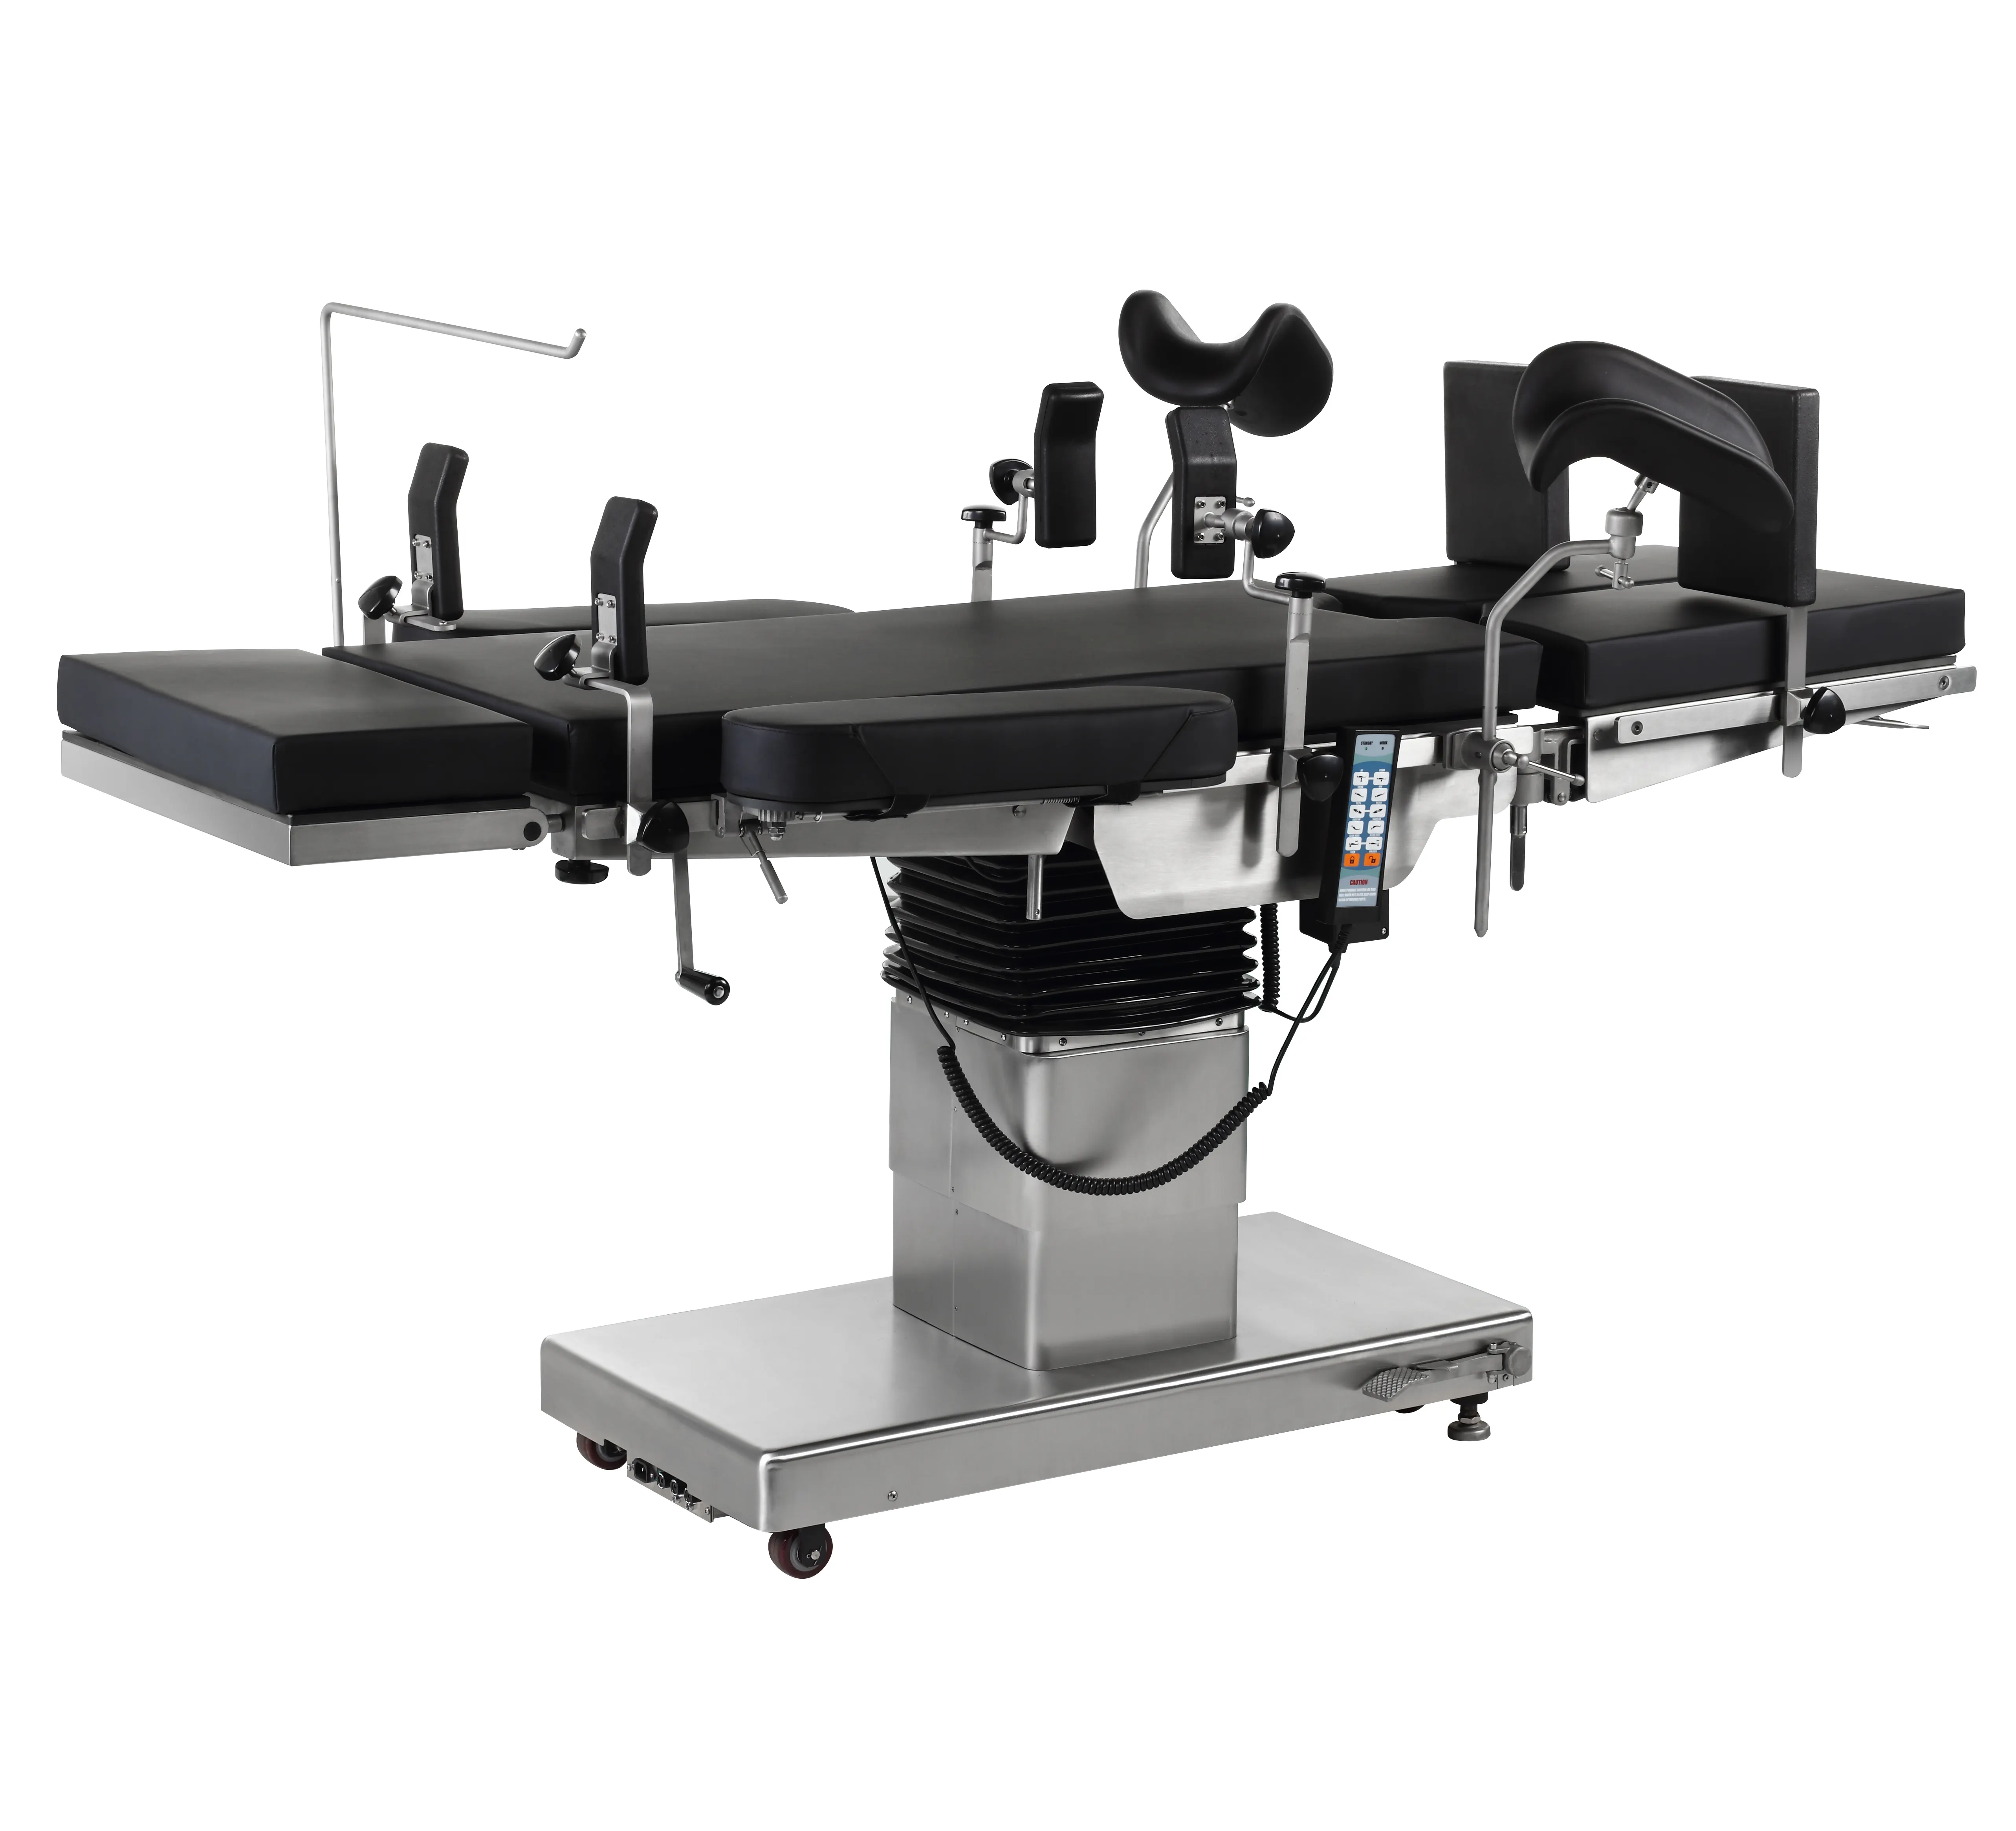 2070x550x 300-700 mm Surgical Bed Operation Table Electric Operating Table